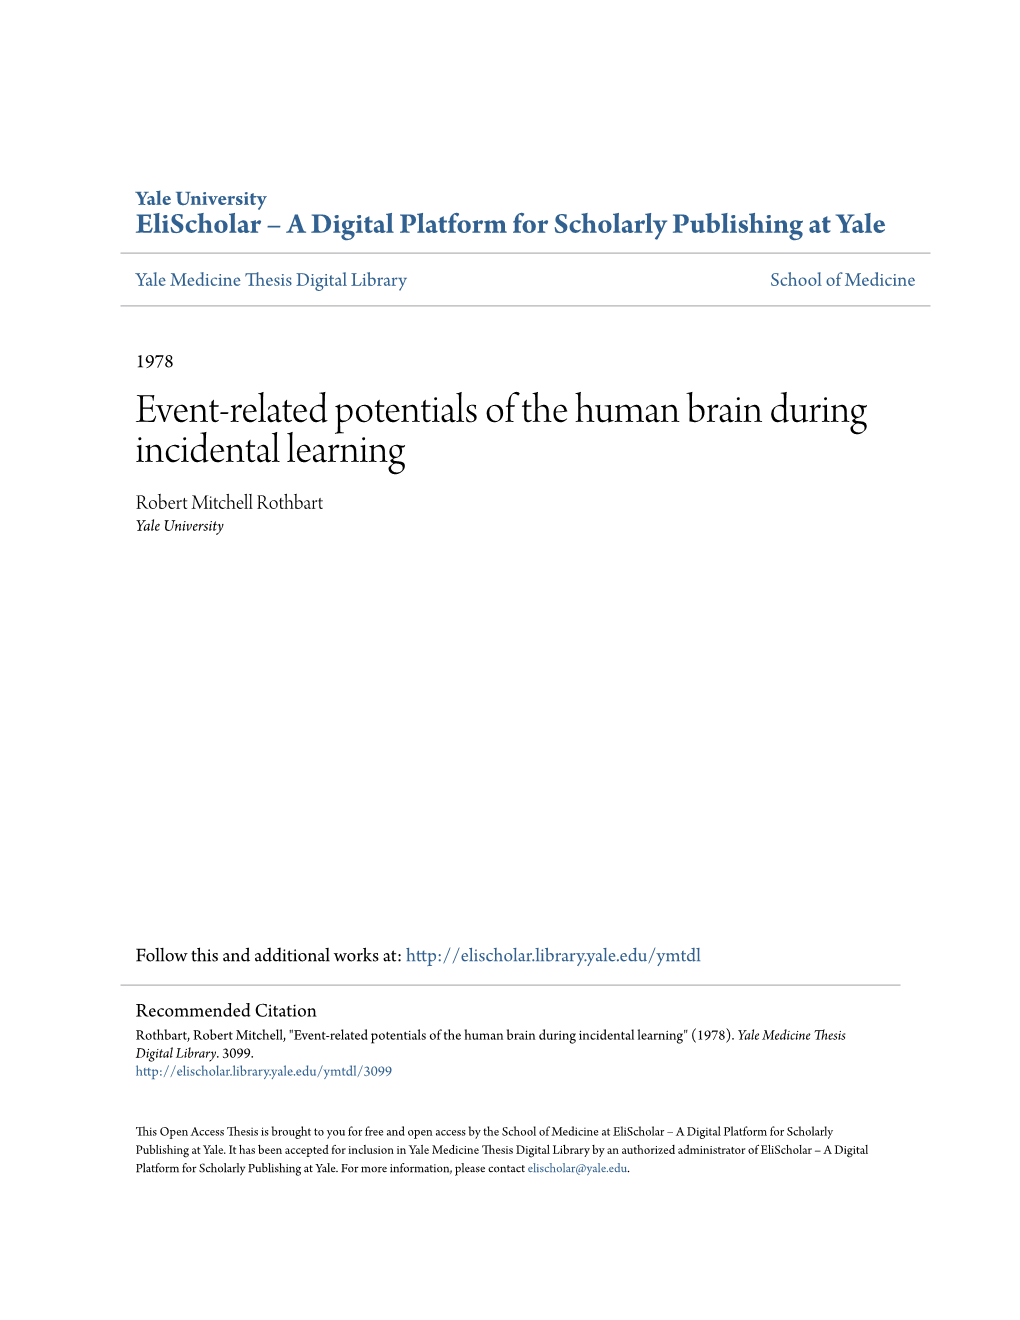 Event-Related Potentials of the Human Brain During Incidental Learning Robert Mitchell Rothbart Yale University